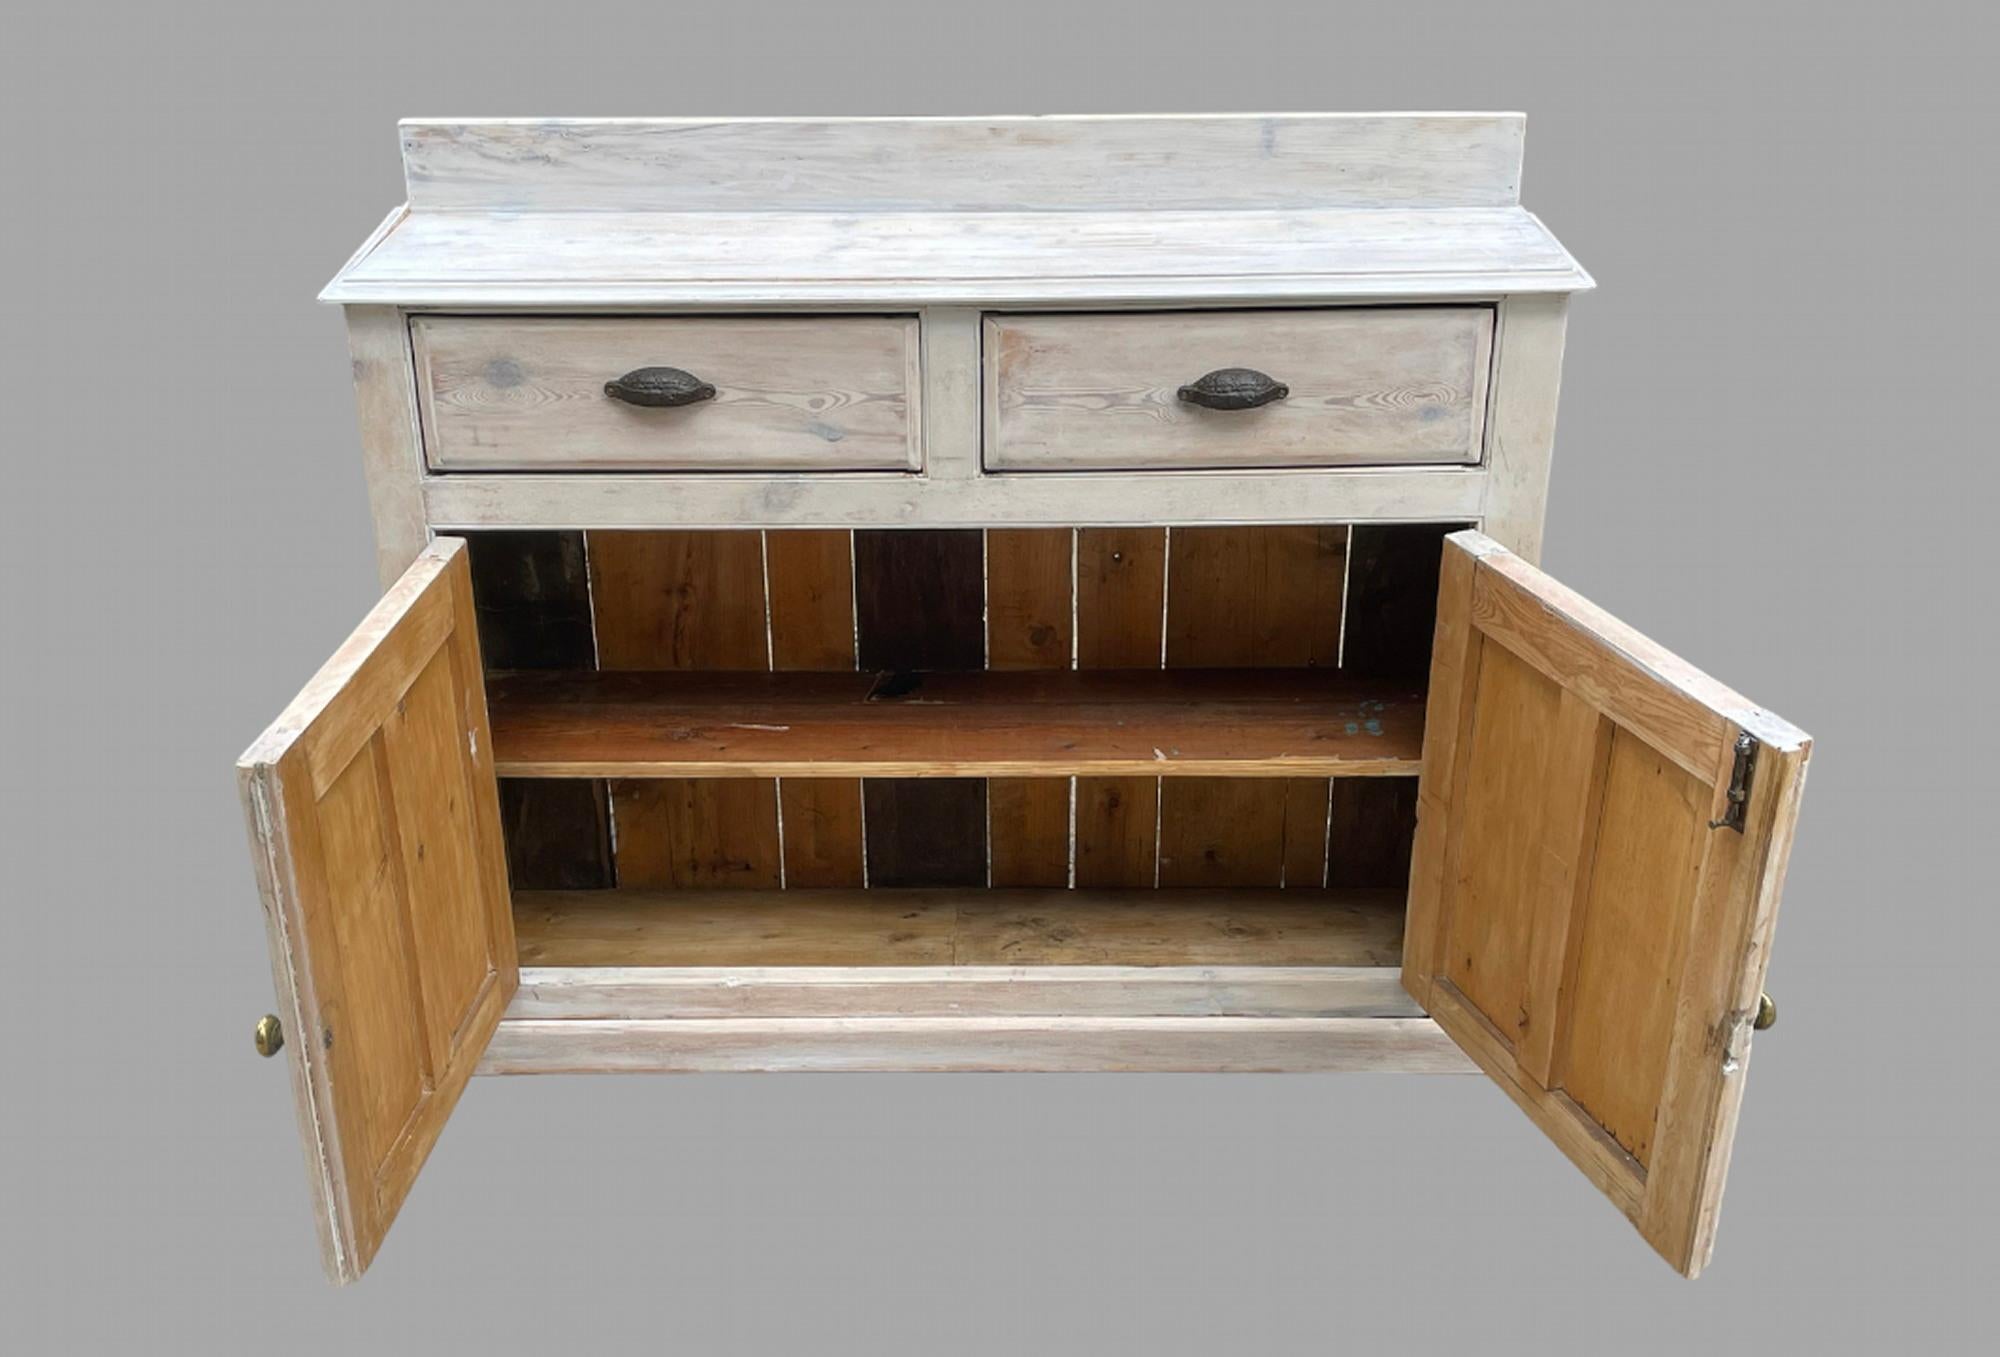 British Lovely Rustic Stripped and Limed Dresser Base